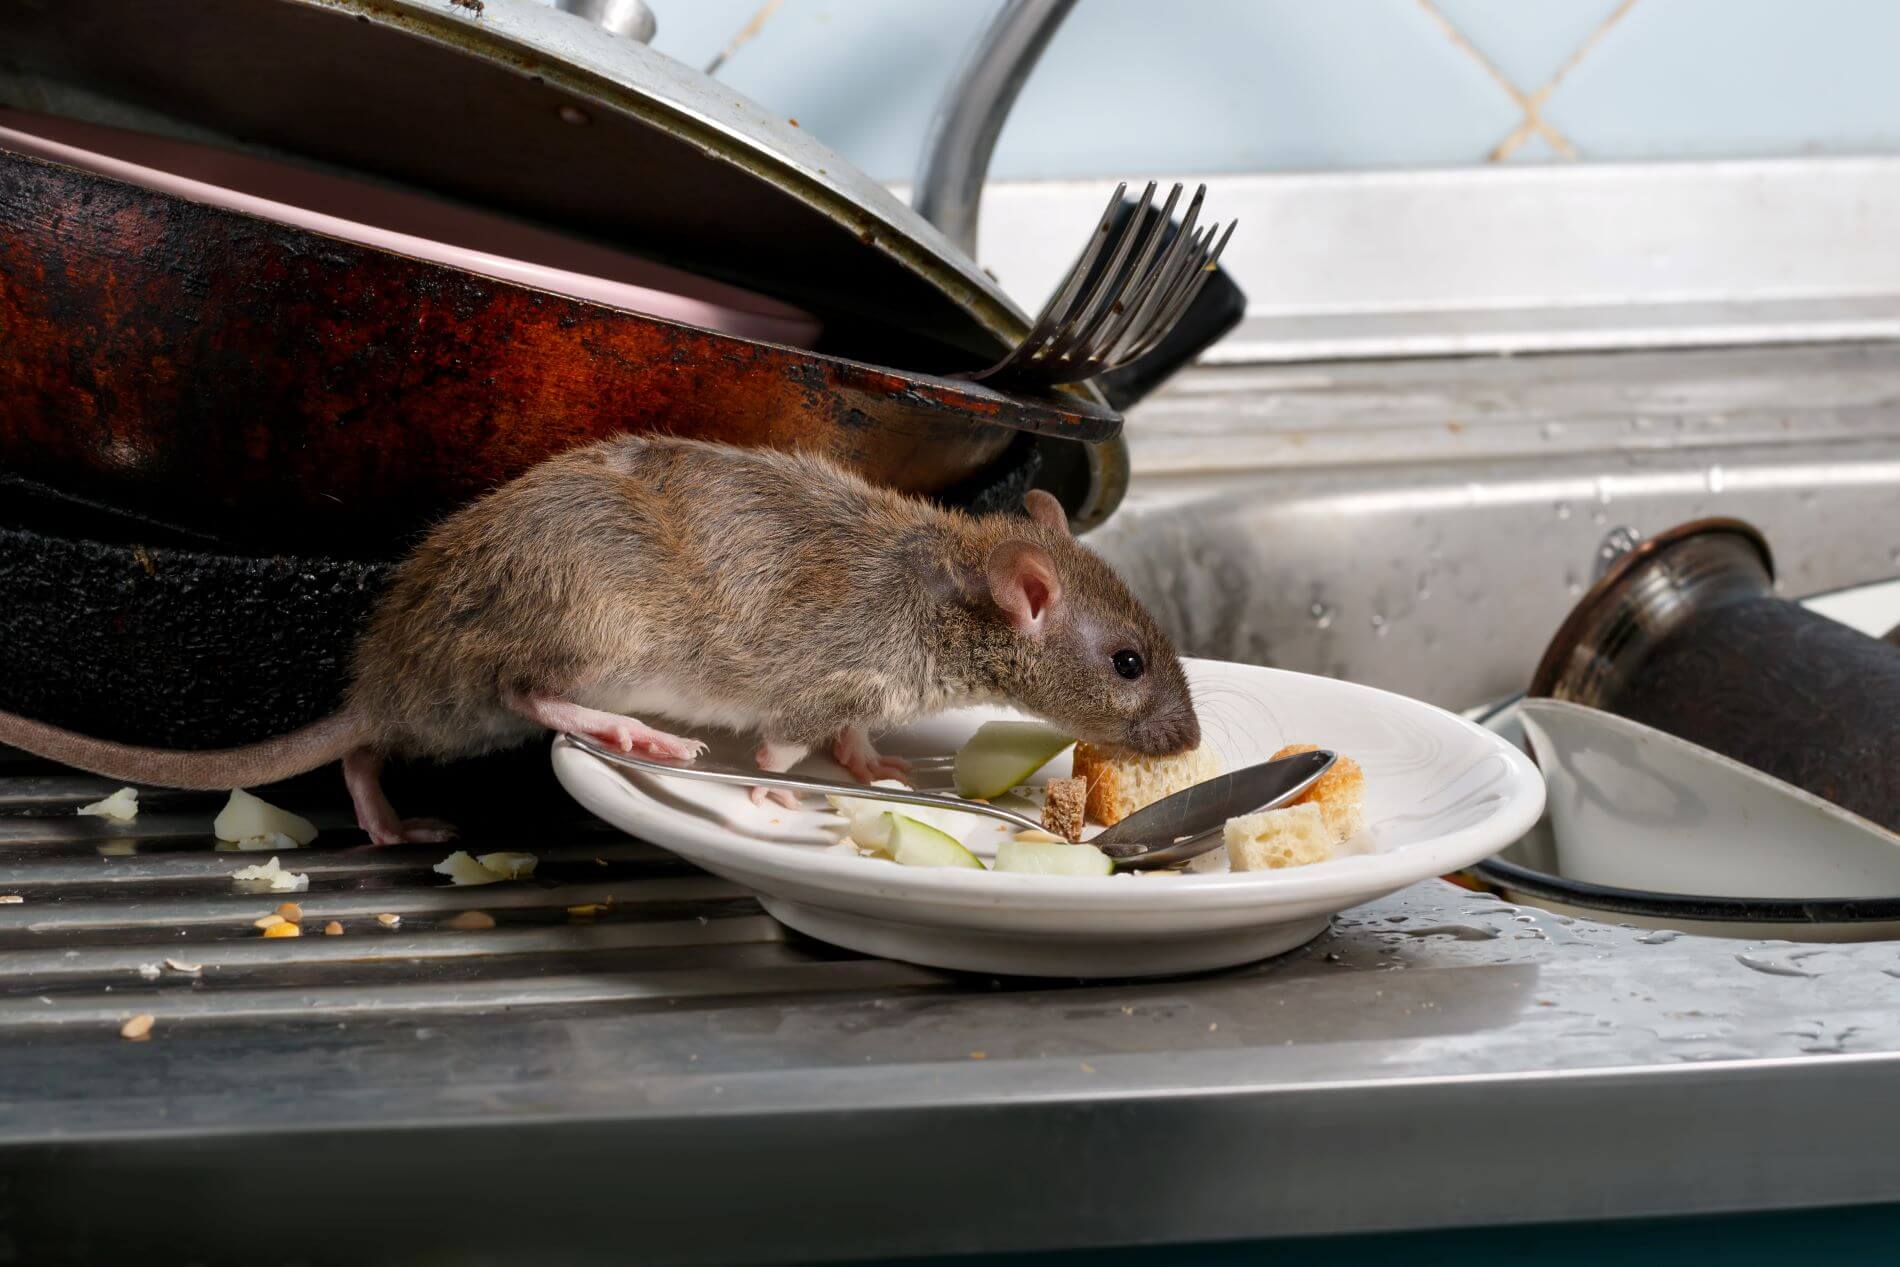 Rodent on kitchen sink with leftover food. Rodents can be asthma triggers.